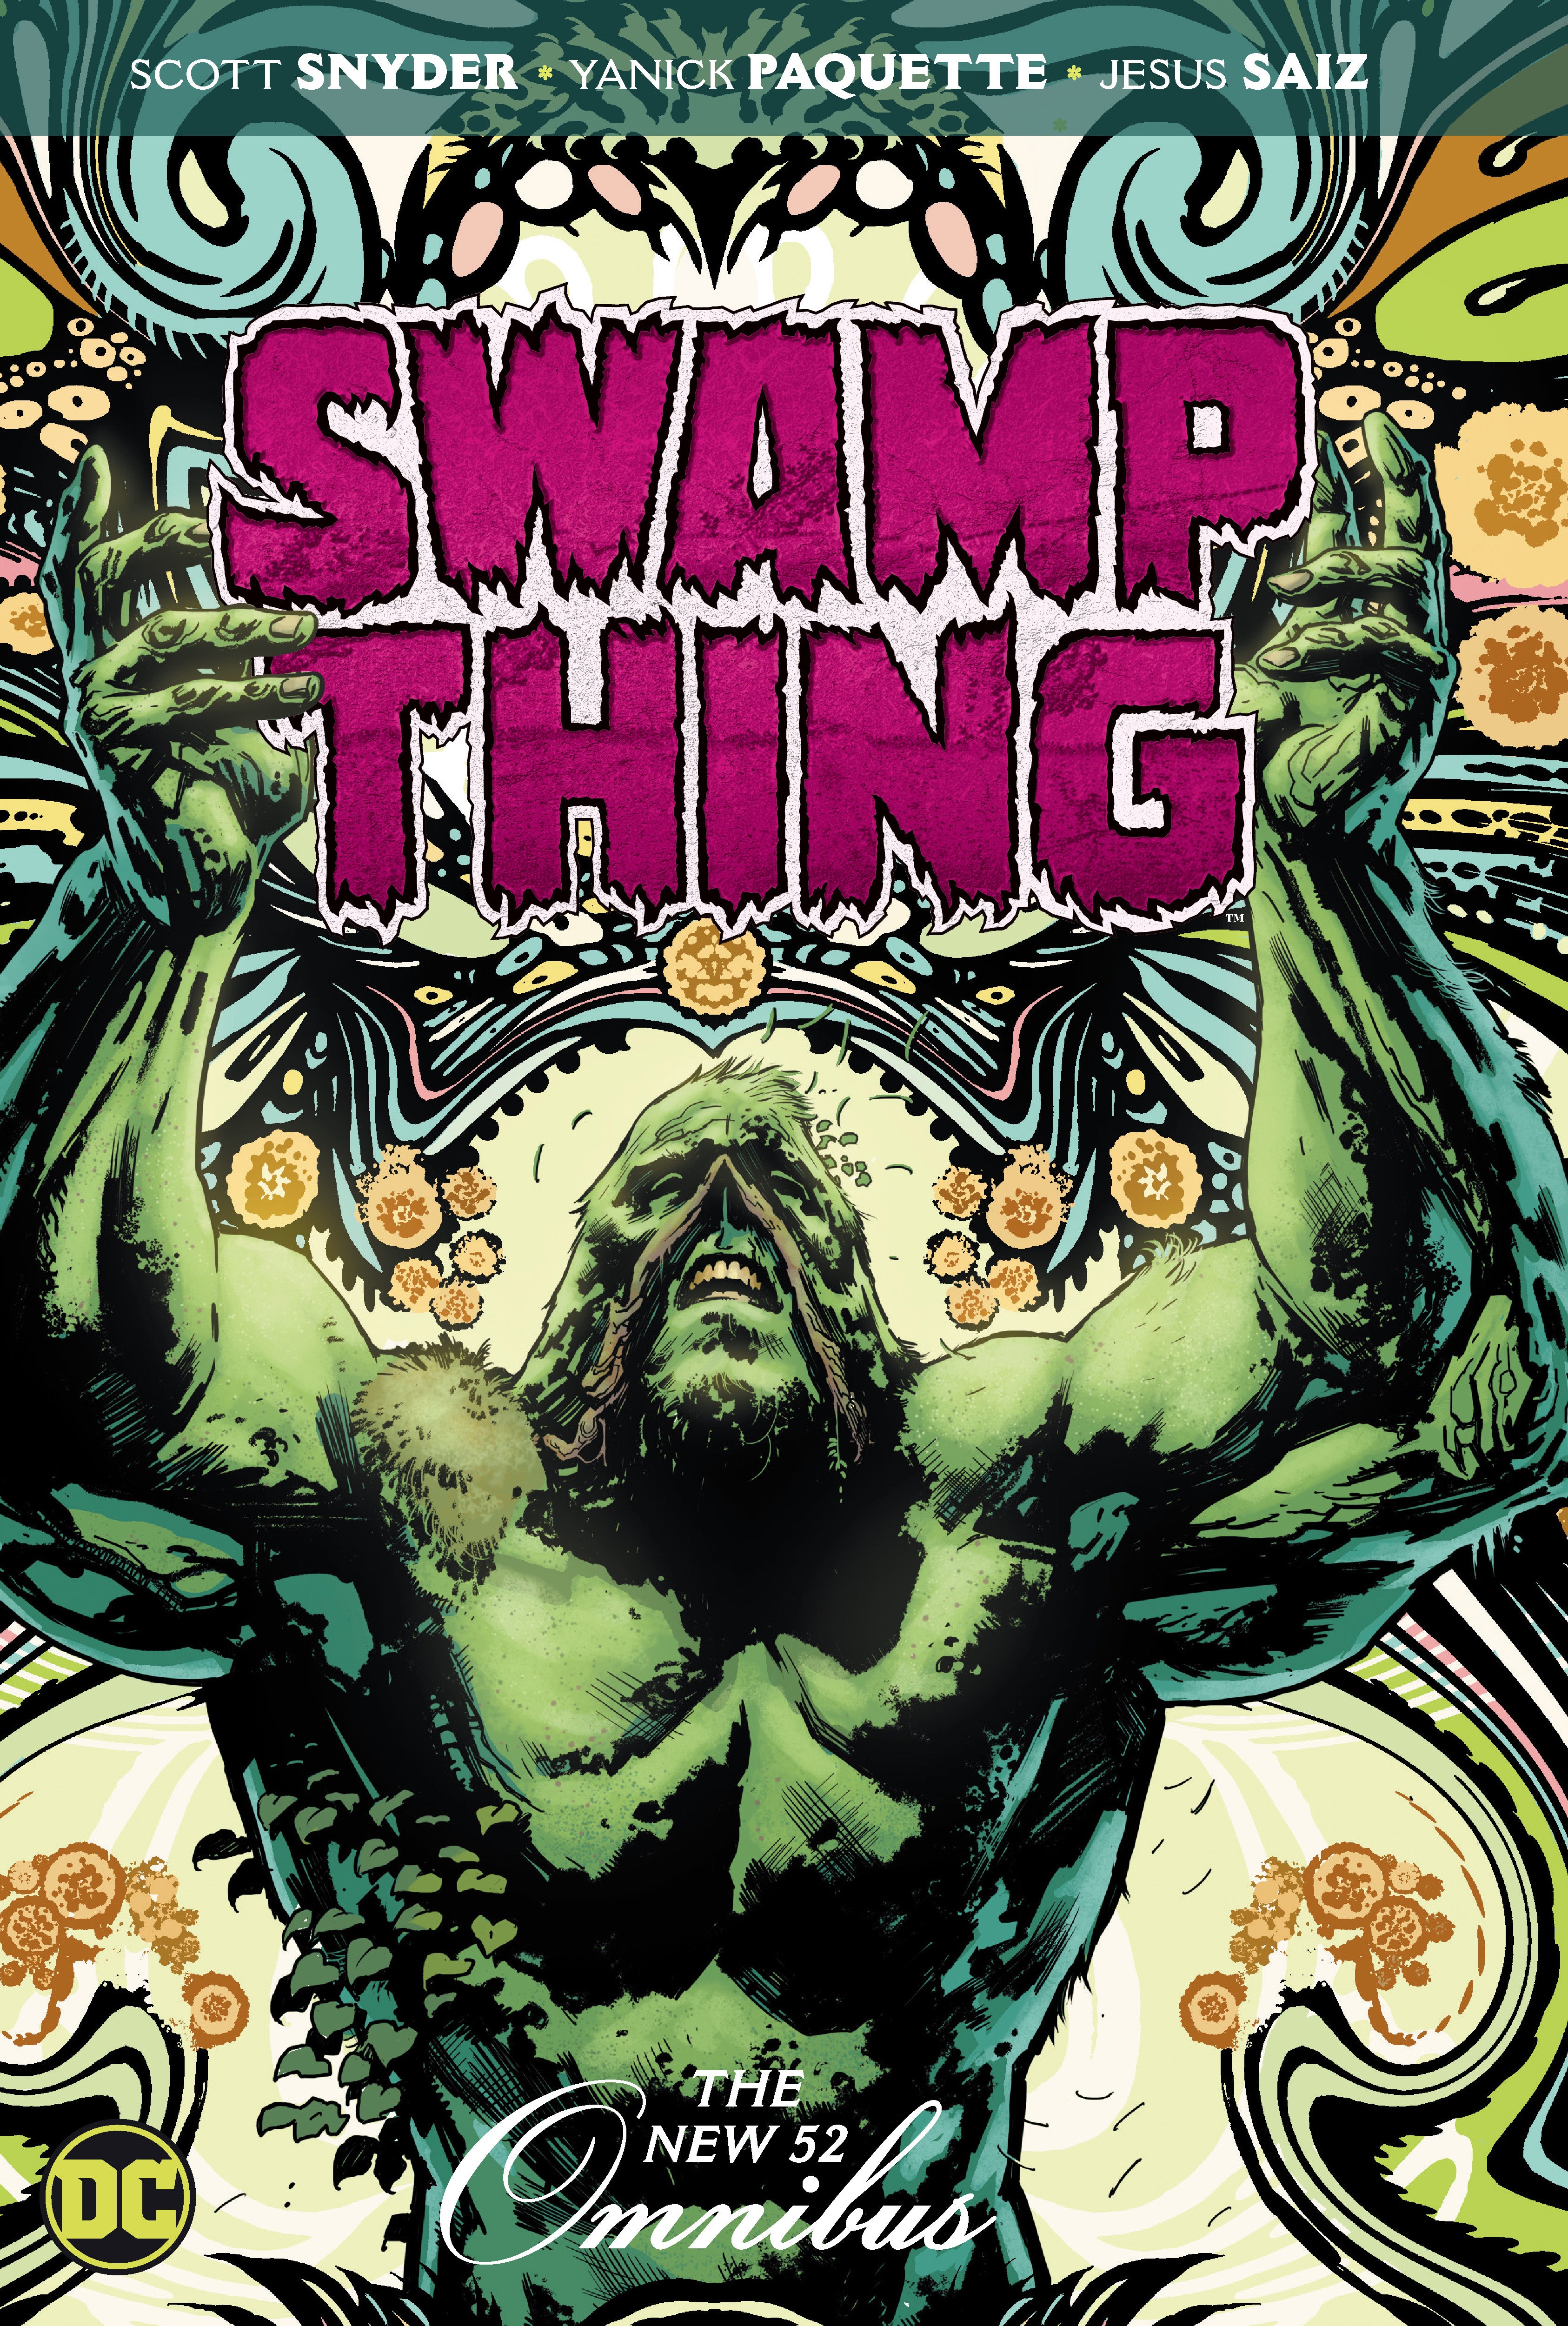 SWAMP THING THE NEW 52 OMNIBUS HARDCOVER